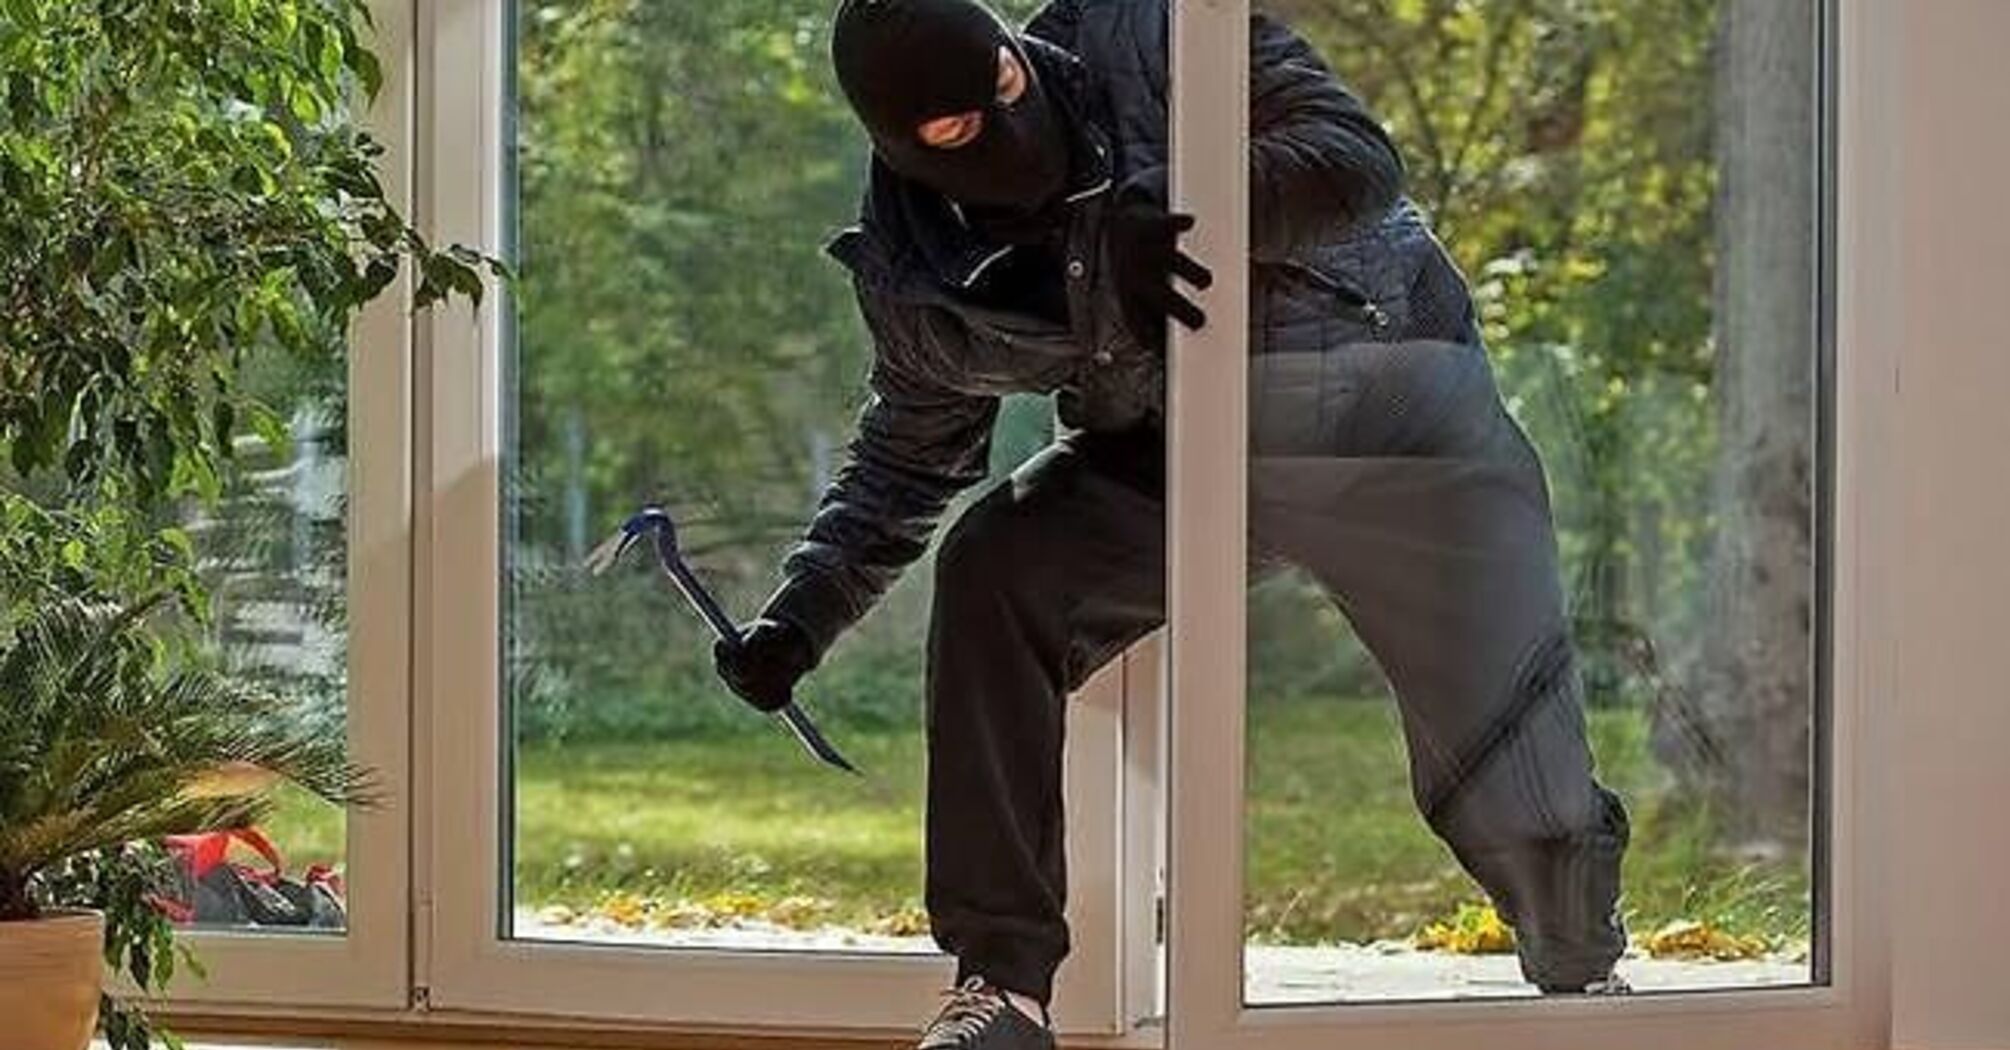 How to protect your home from robbery